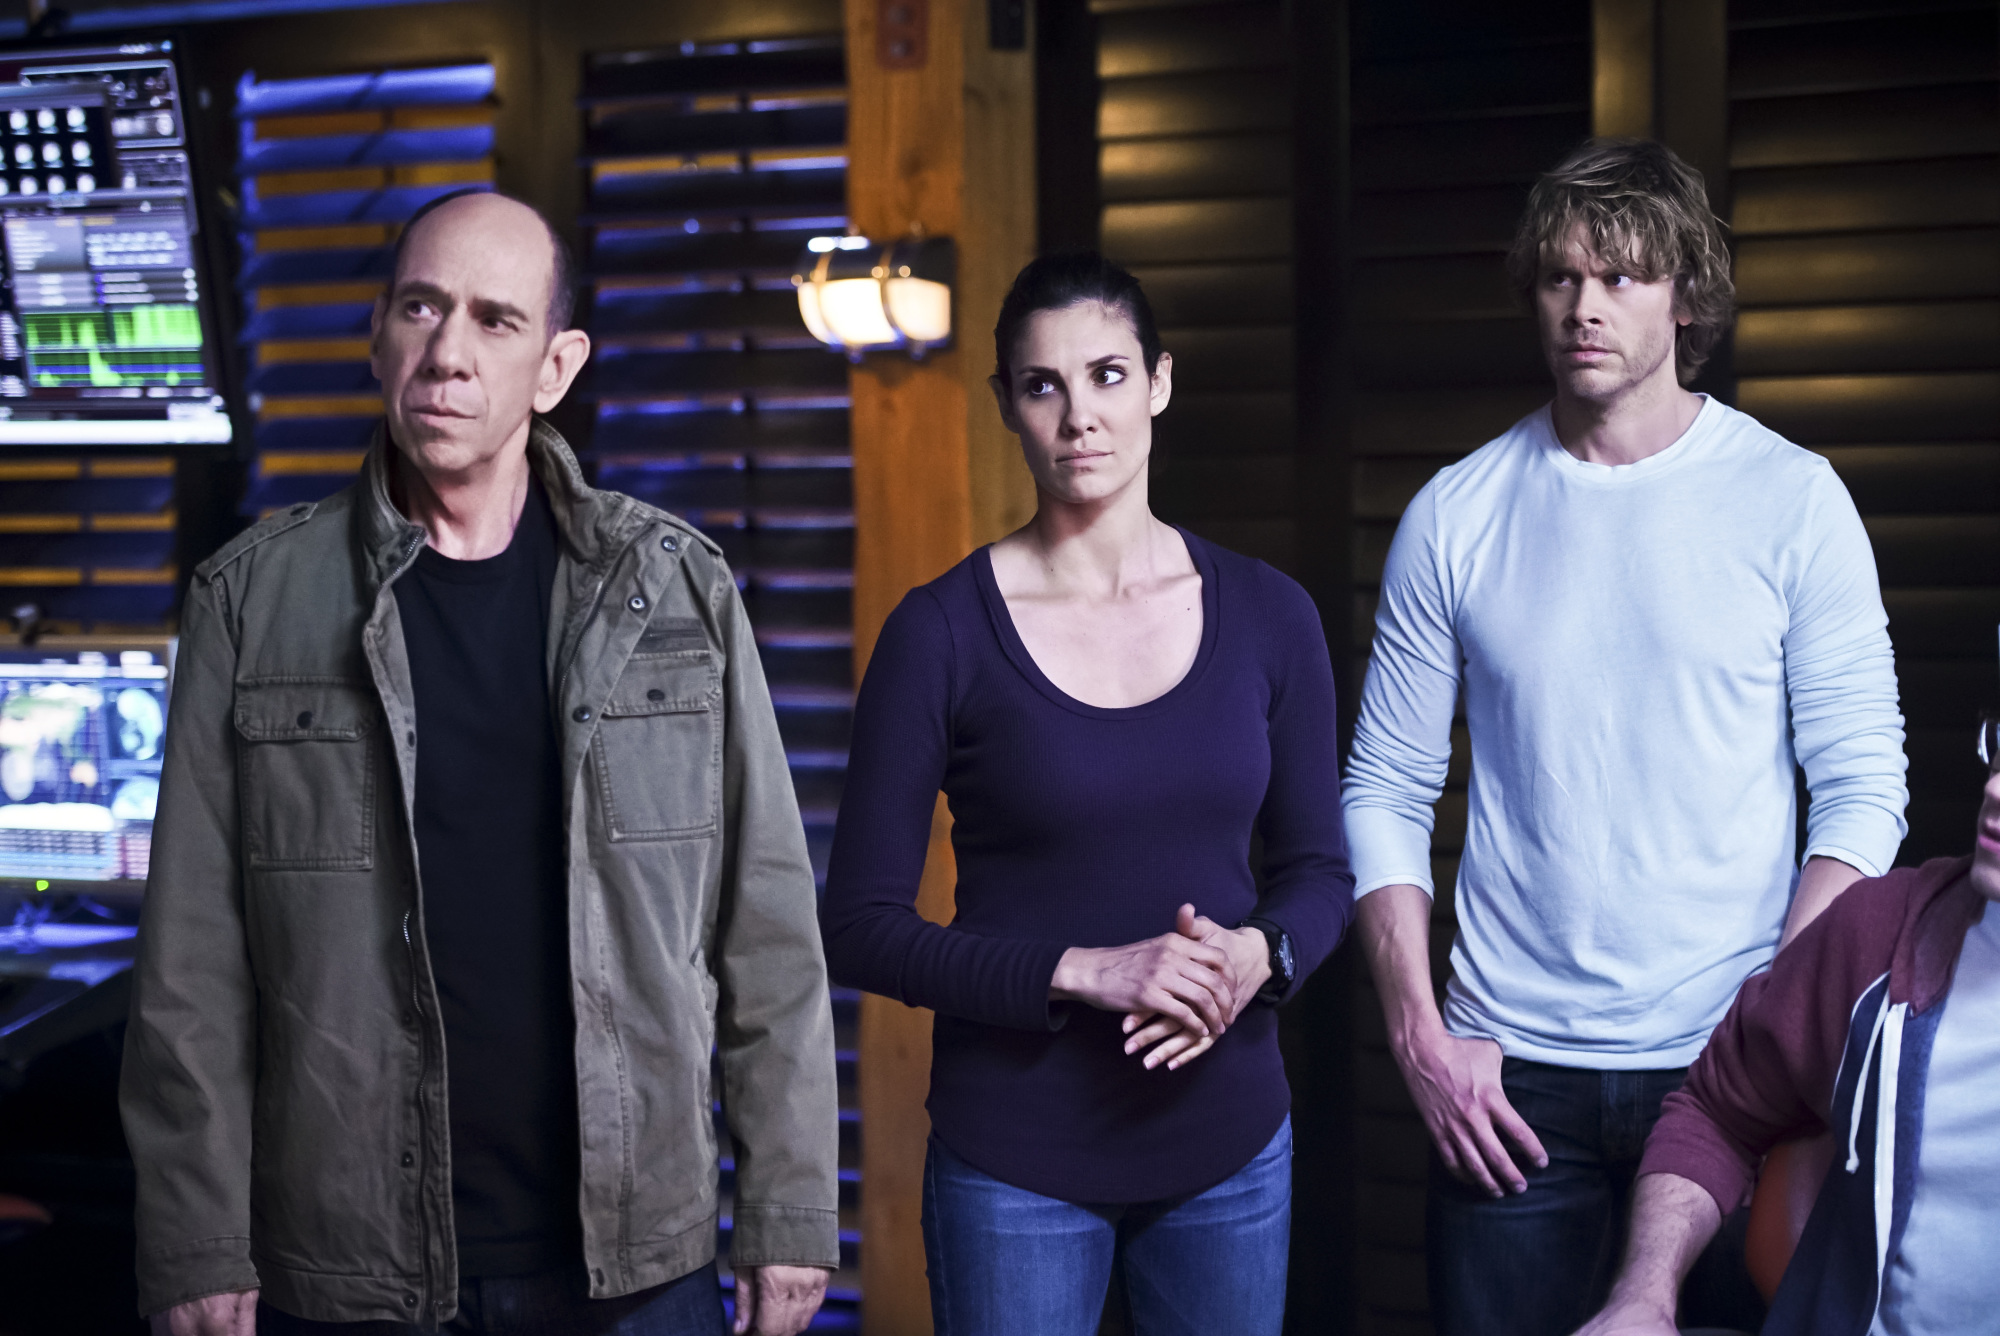 Miguel Ferrer as NCIS Assistant Director Owen Granger, Daniela Ruah as Special Agent Kensi Blye, and Eric Christian Olsen as LAPD Liaison Marty Deeks